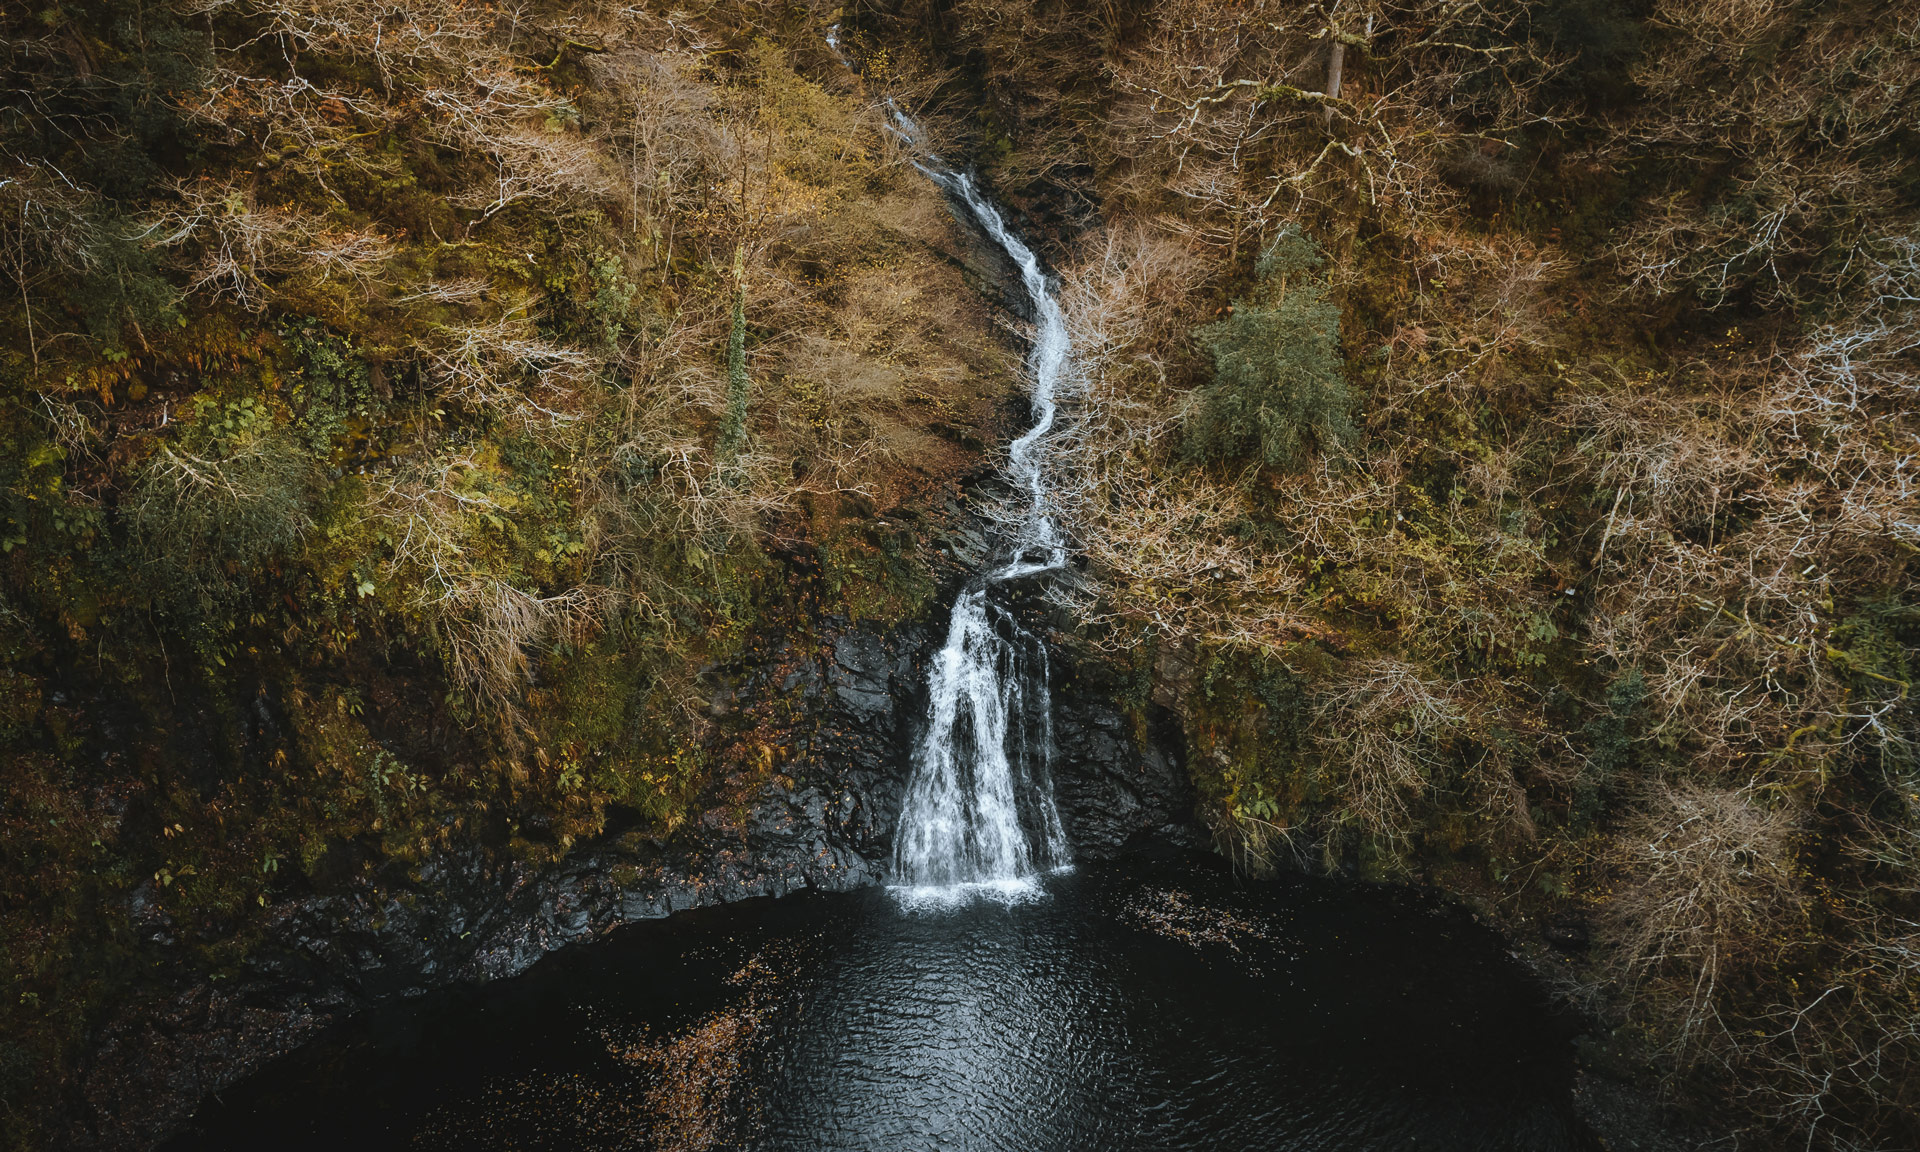 Waterfall at Felenrhyd and Llennyrch woods on an autumn day.